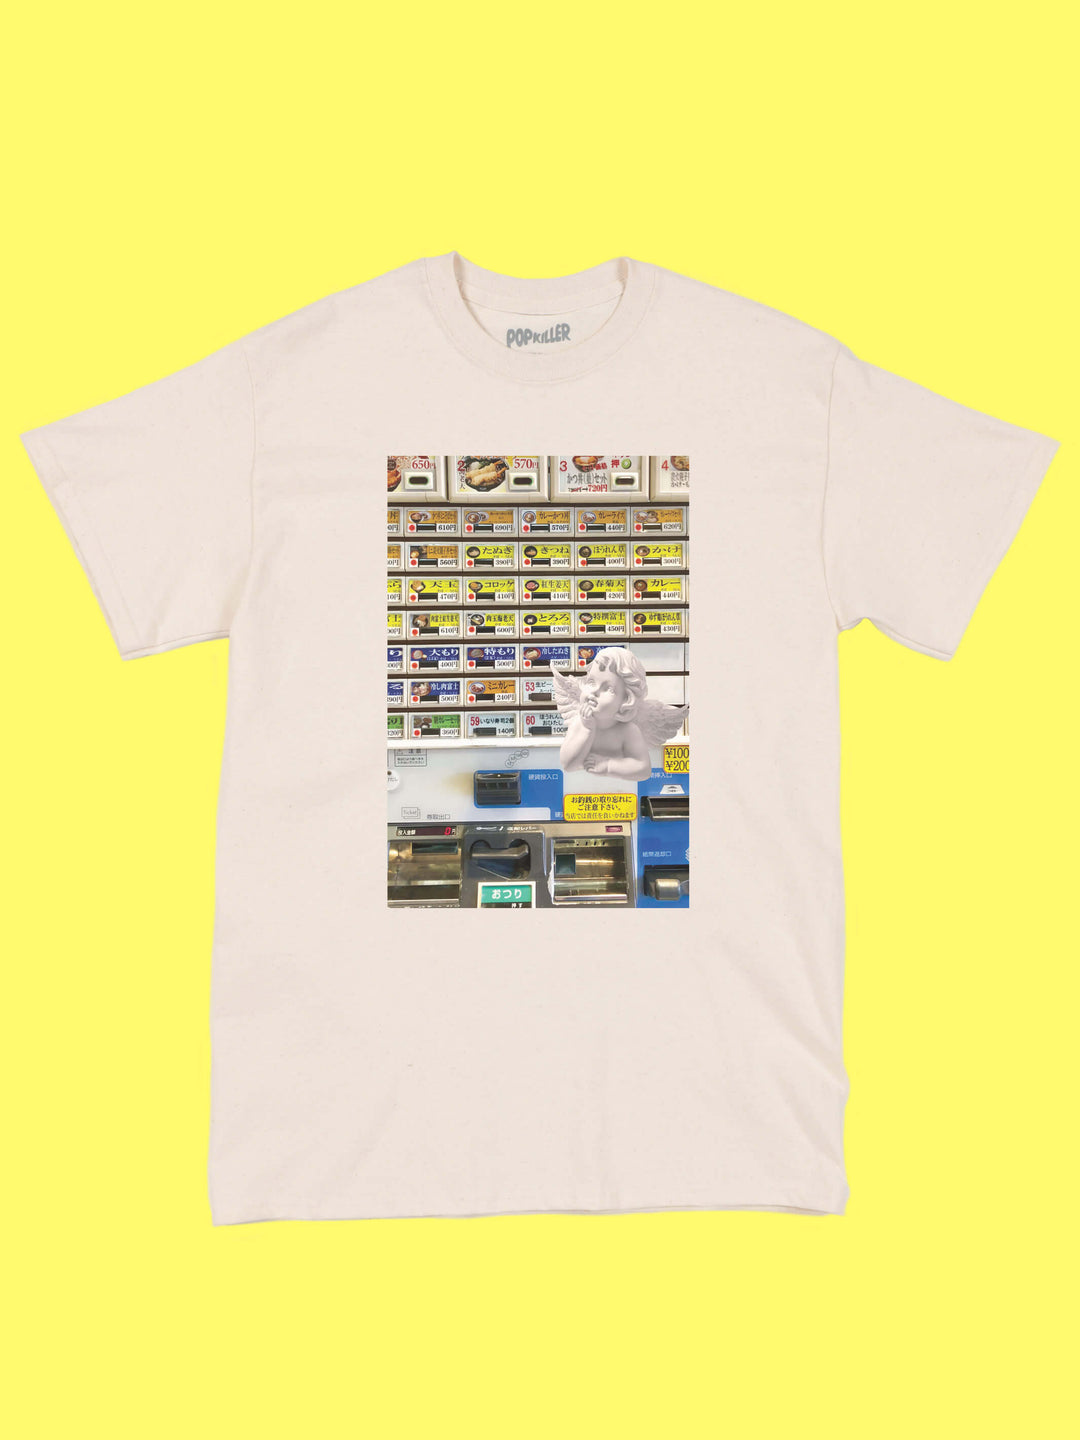 A beige t-shirt with a vaporwave photo of a Japanese vending machine on it.